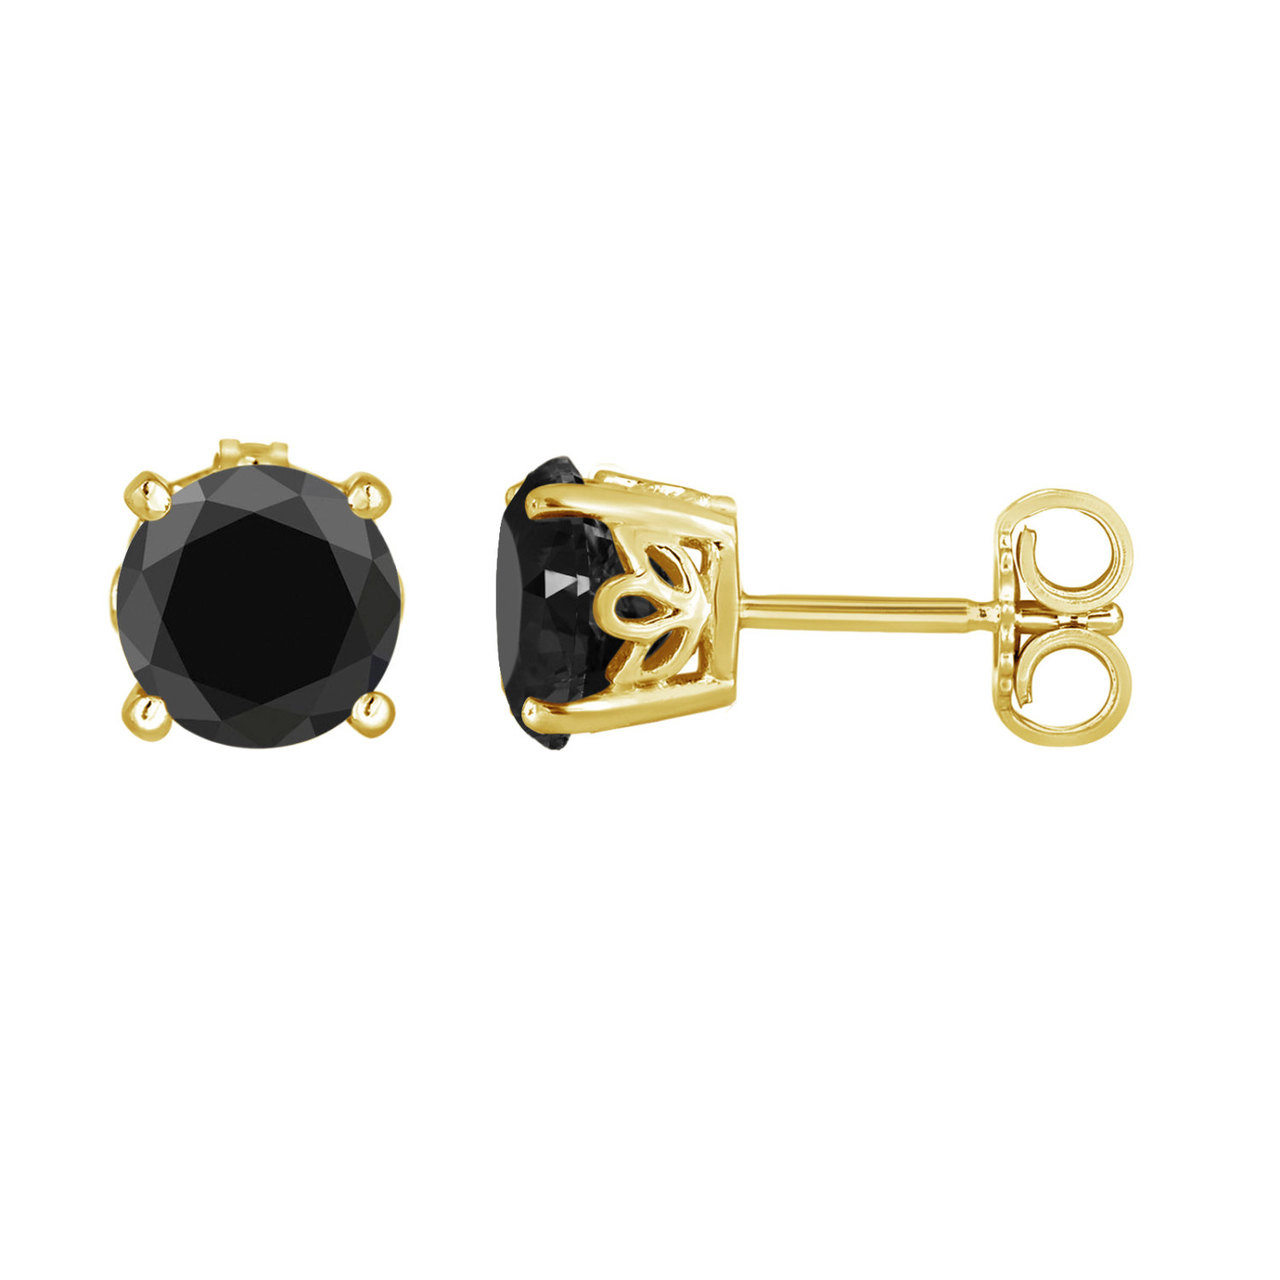 Amber Drop Earrings with Black Rose Cut Diamonds in 22k and18k Yellow Gold  - Shibumi Gallery